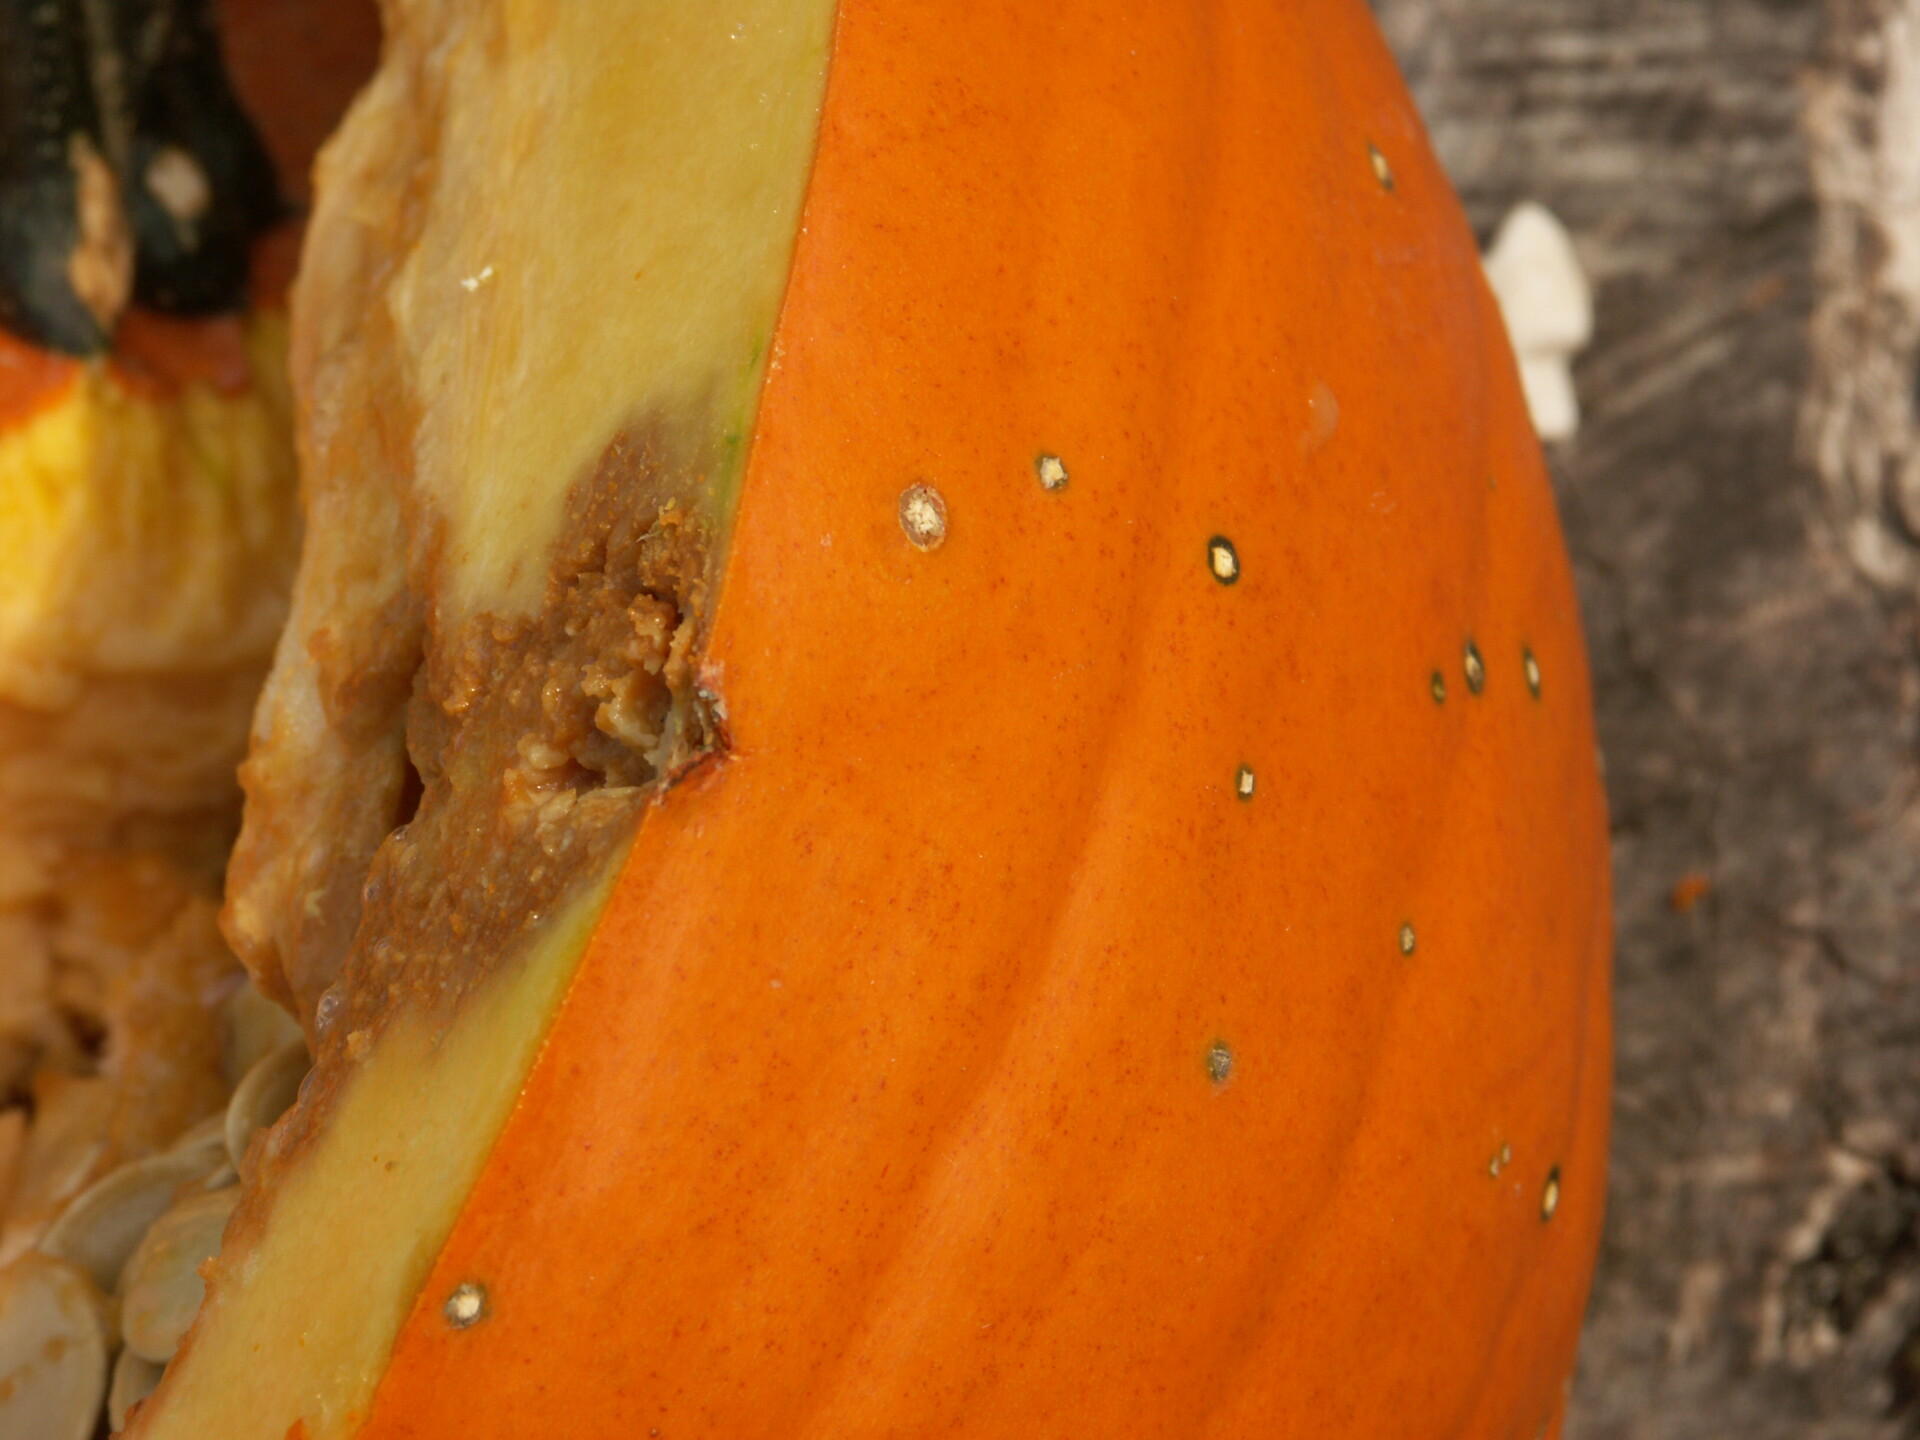 Typical lesions of bacterial spot can be observed on this pumpkin along with one that has been infected by secondary fungi causing it to rot through the pumpkin rind.